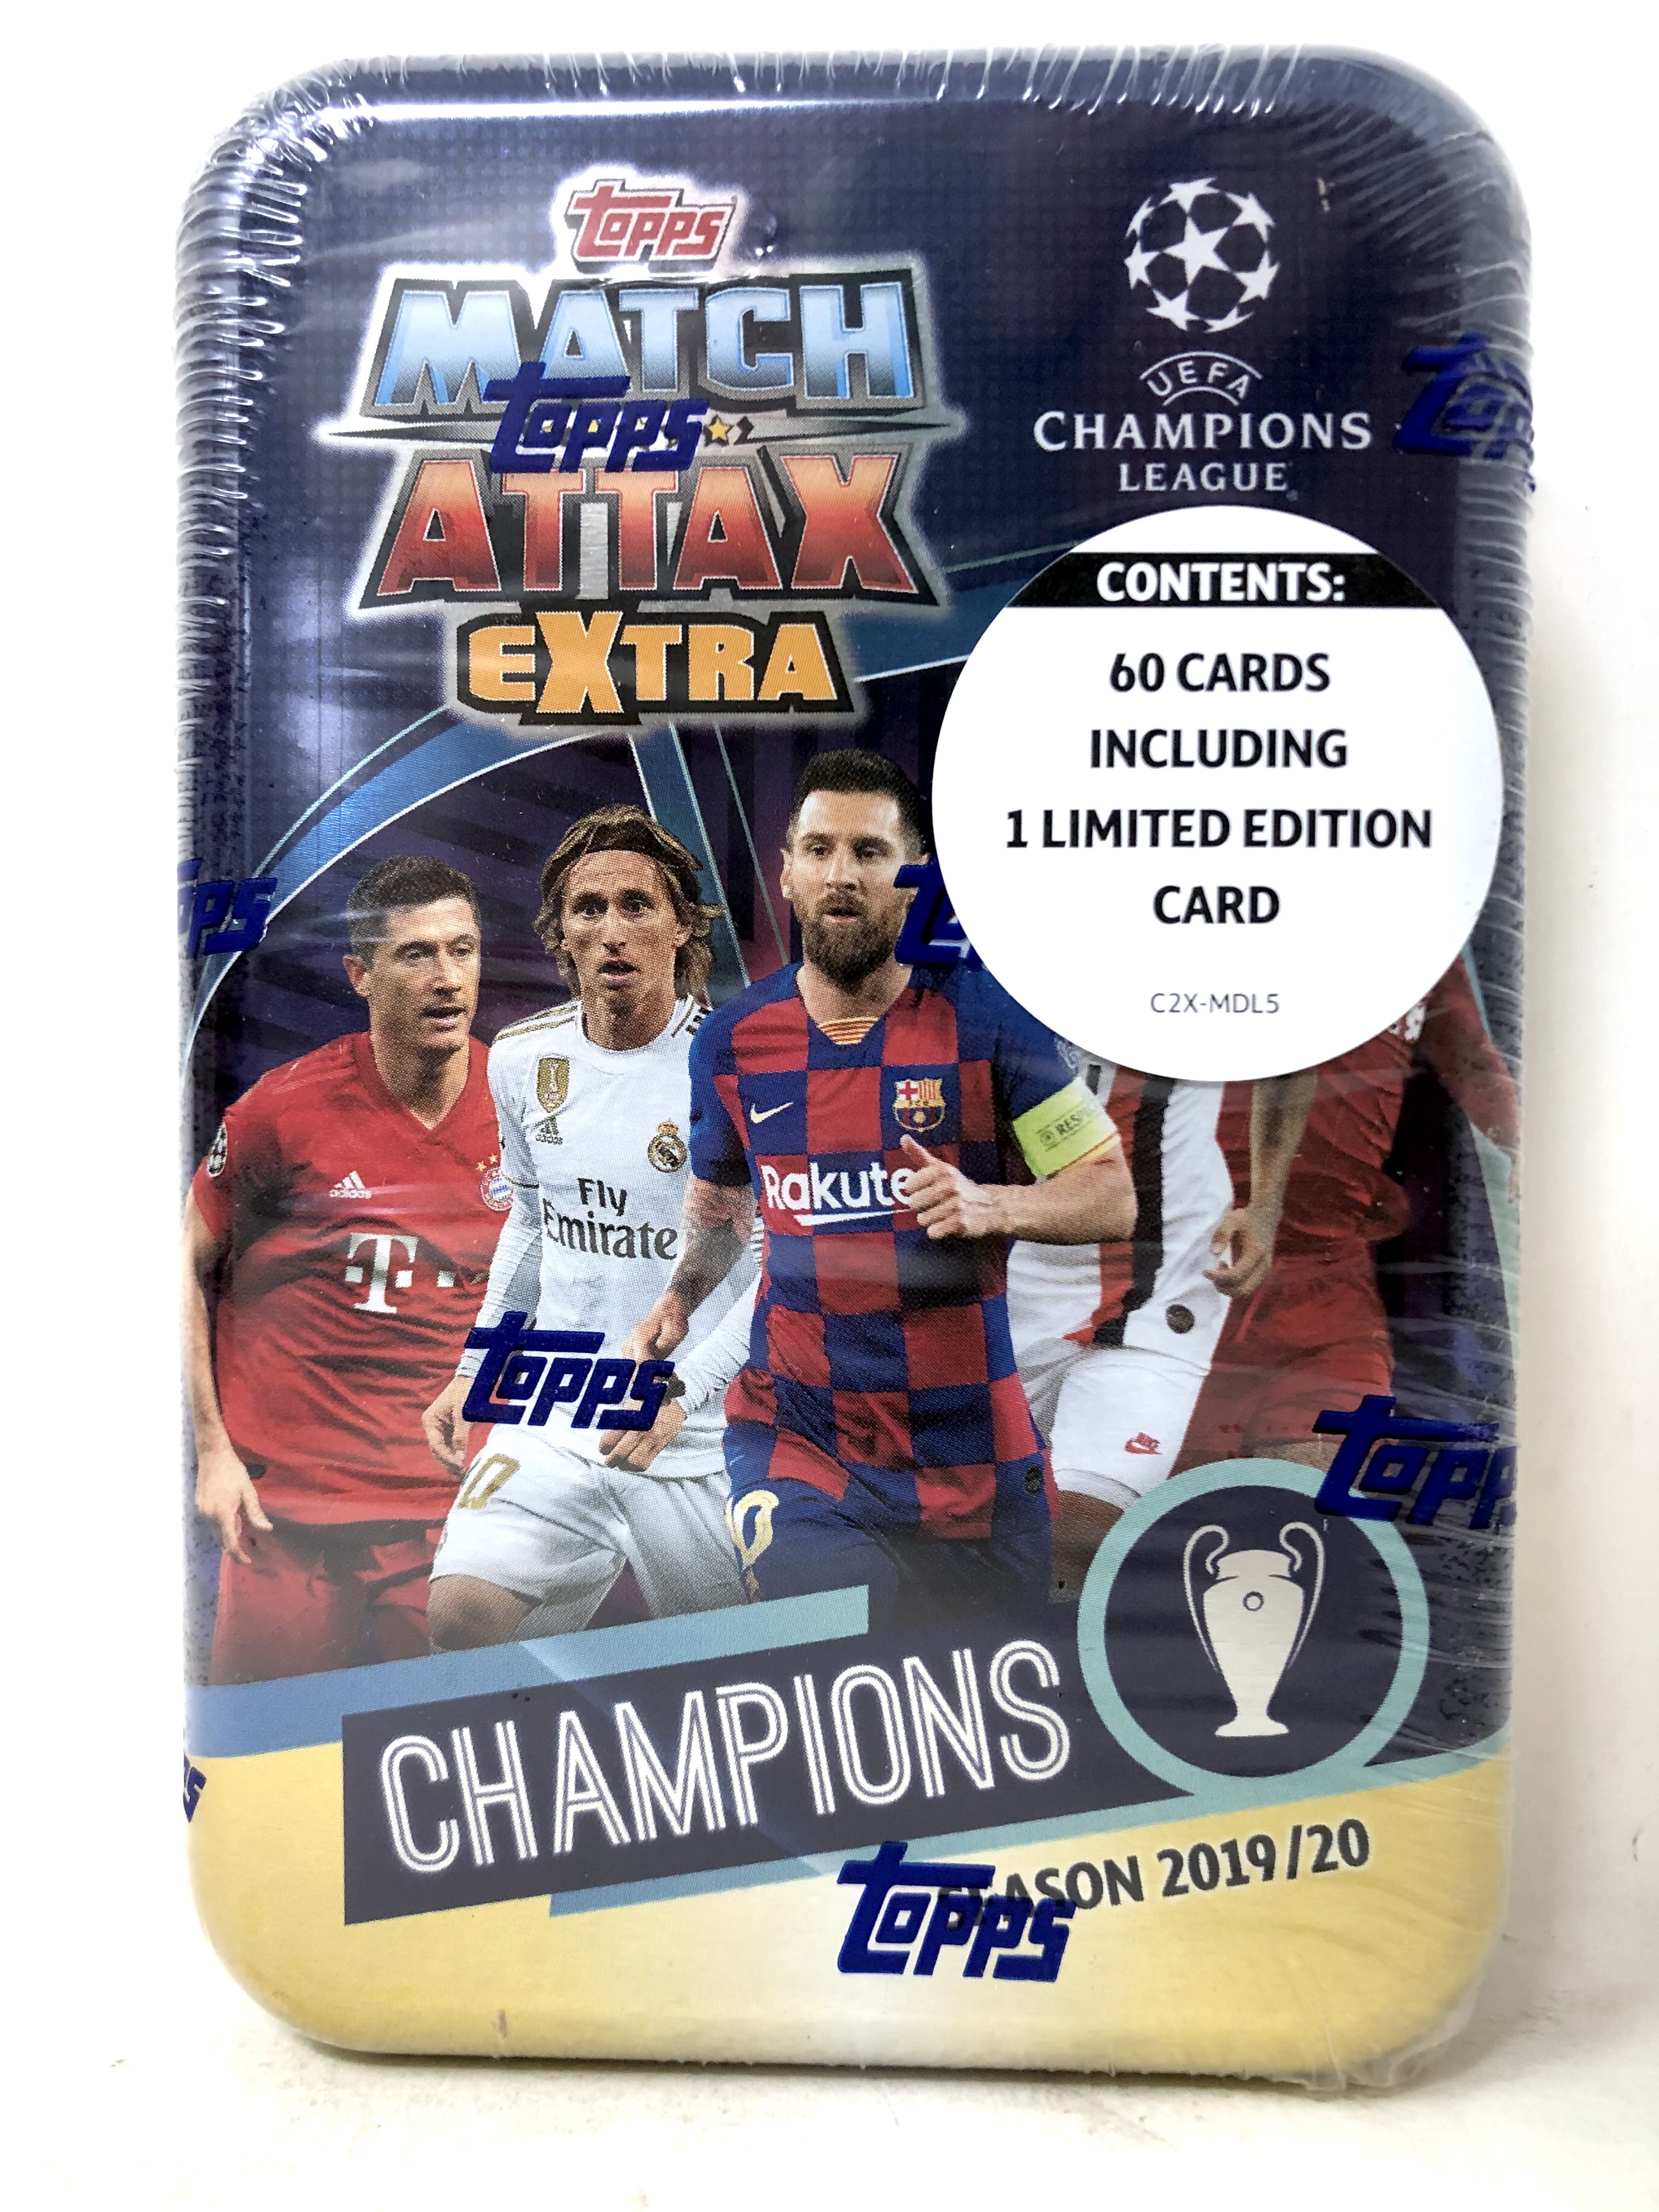 2019/20 SUPERBOOST-ACTION-CHAMPIONS LEAGUE TOPPS MATCH ATTAX EXTRA 